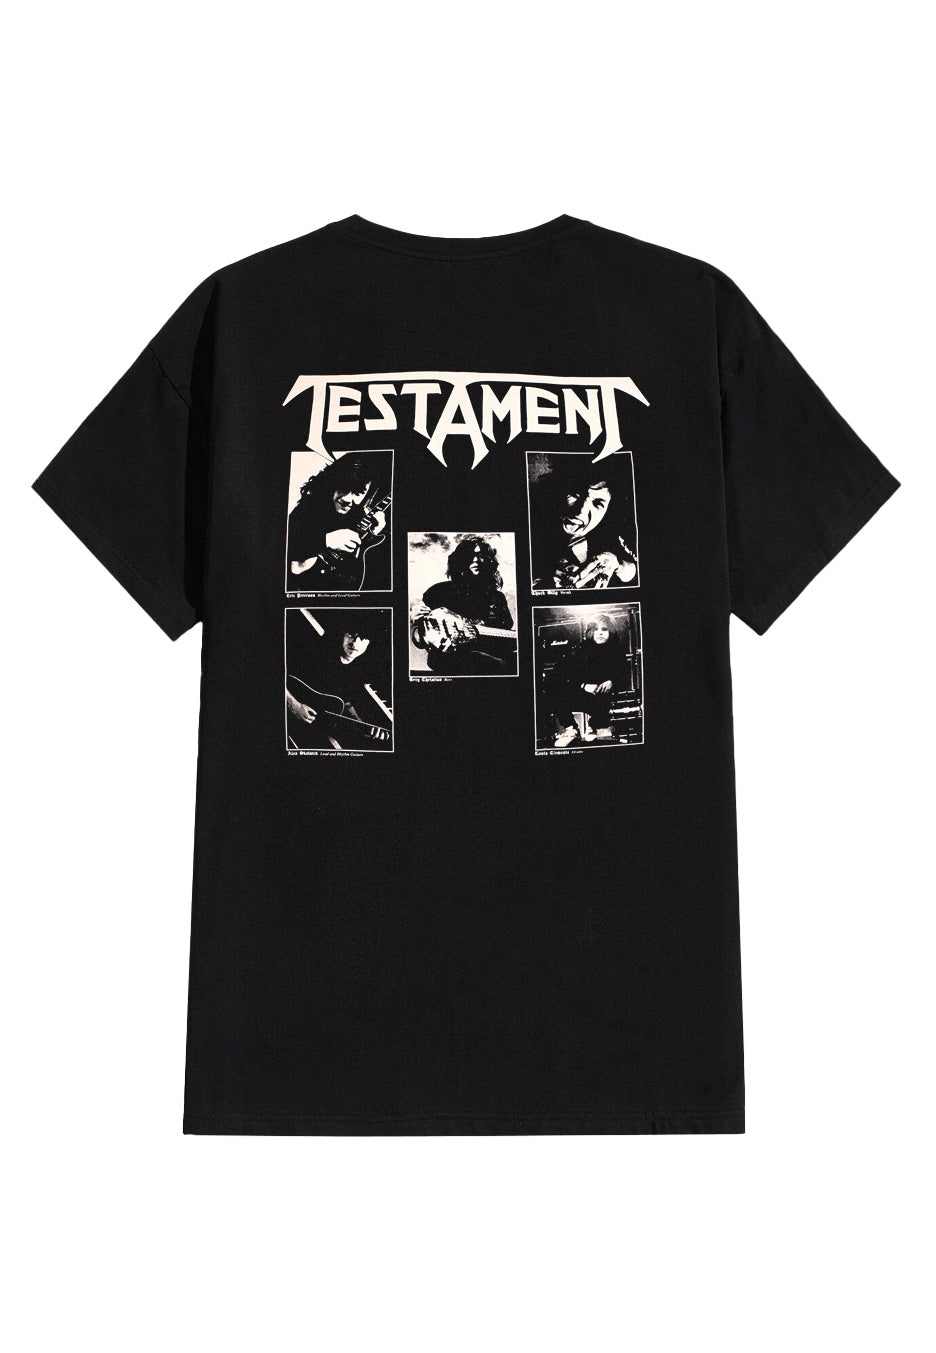 Testament - Practice What You Preach - T-Shirt